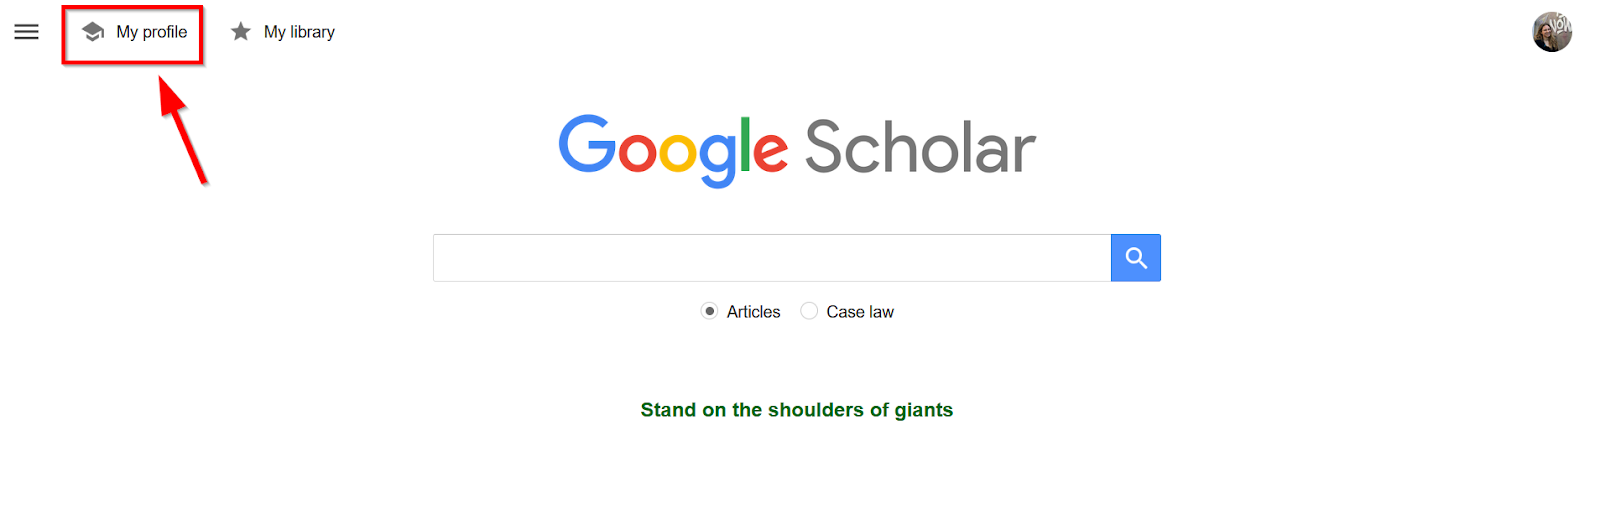  a screenshot of the Google Scholar homepage with an arrow pointing to the "My profile" button in the top left corner